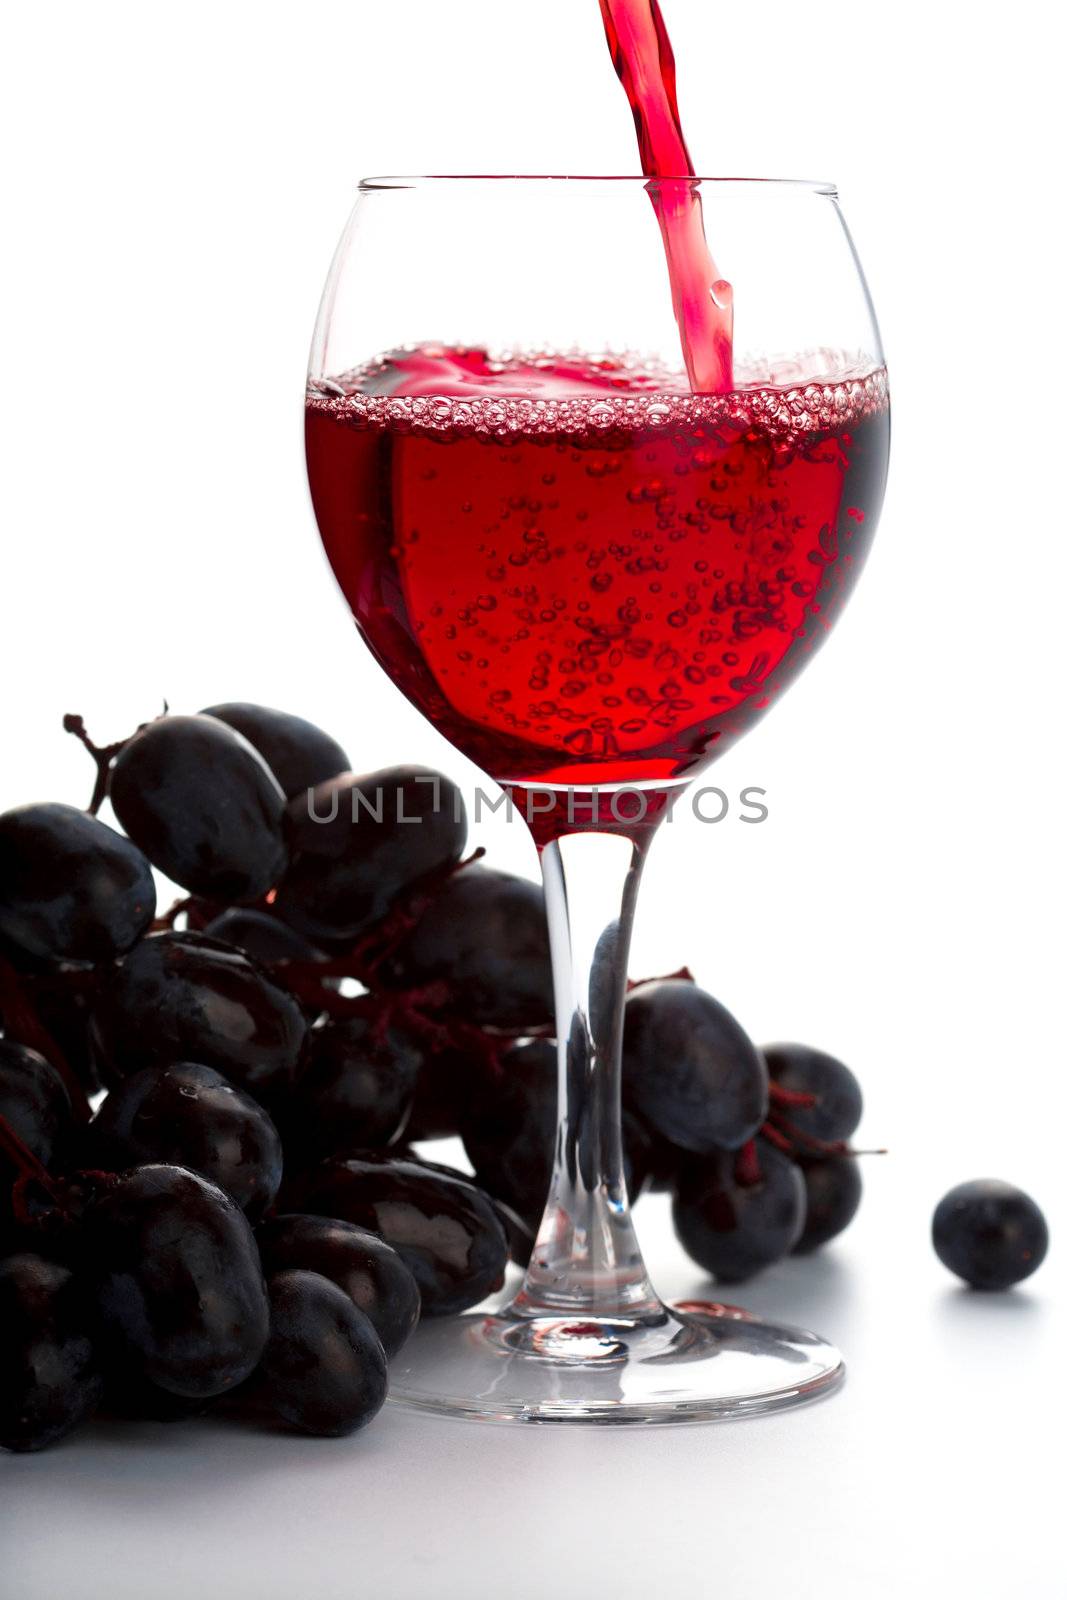 grapes and red wine in a glass isolated on white background